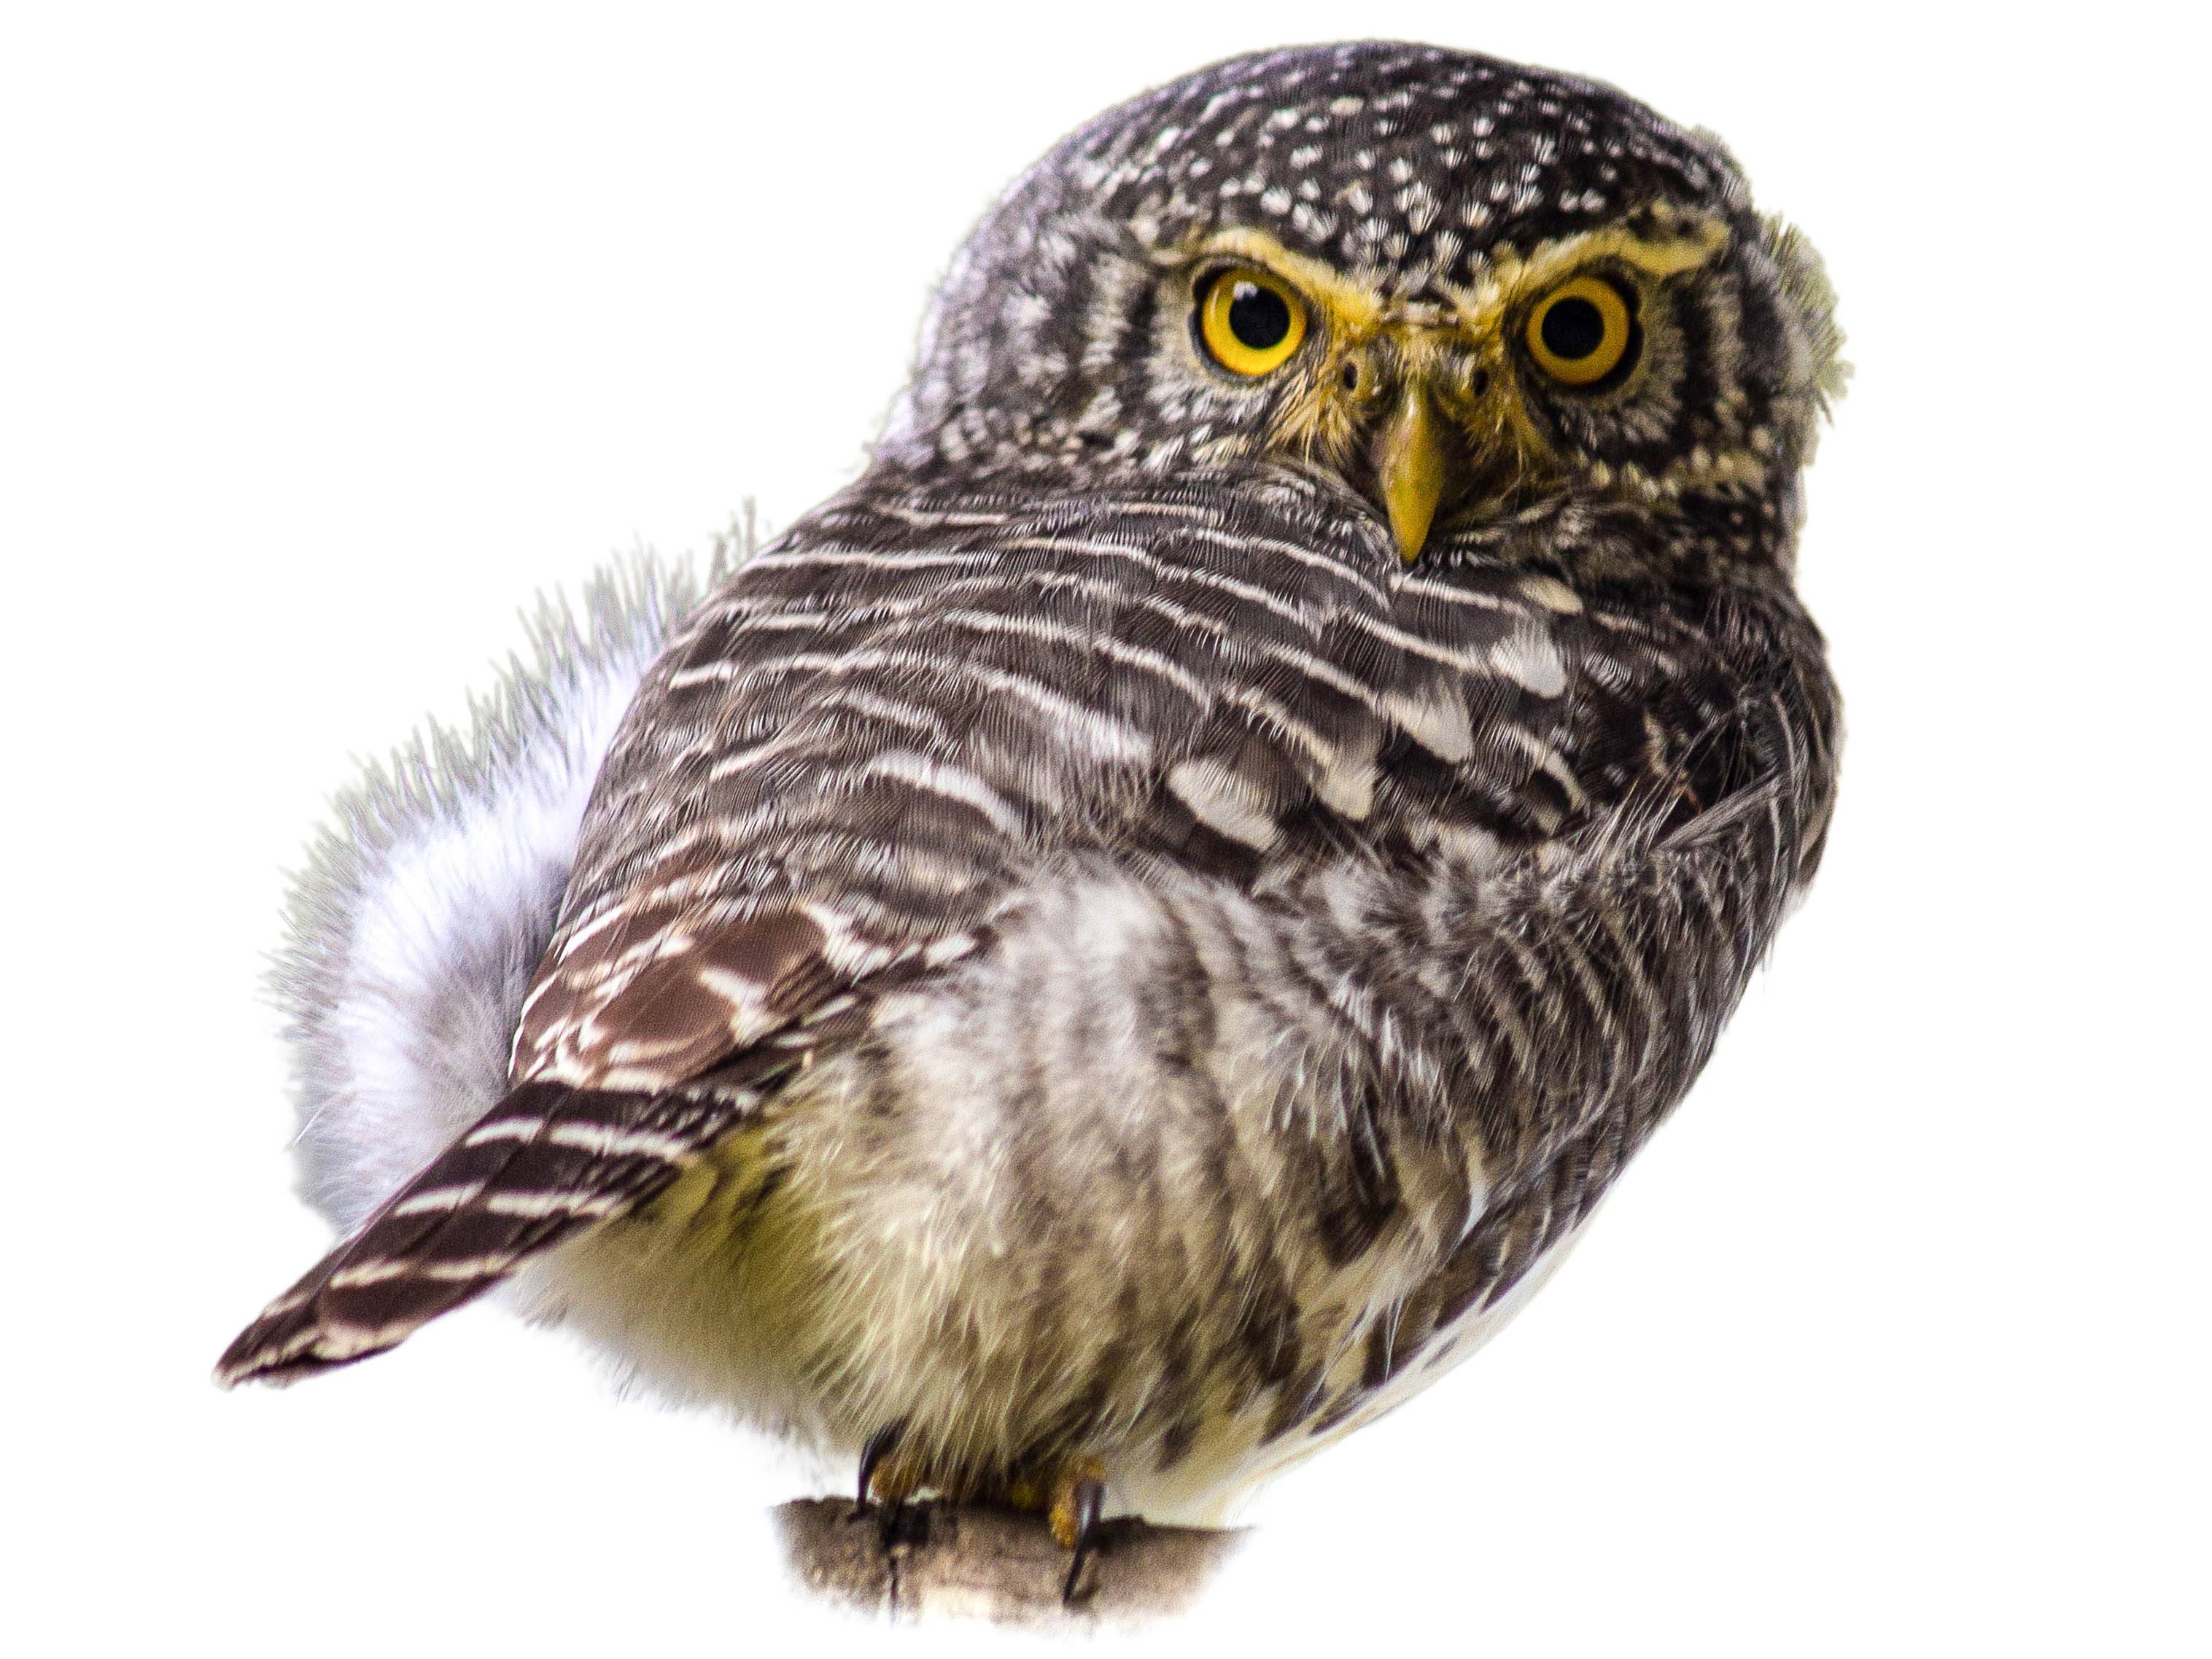 A photo of a Collared Owlet (Taenioptynx brodiei)